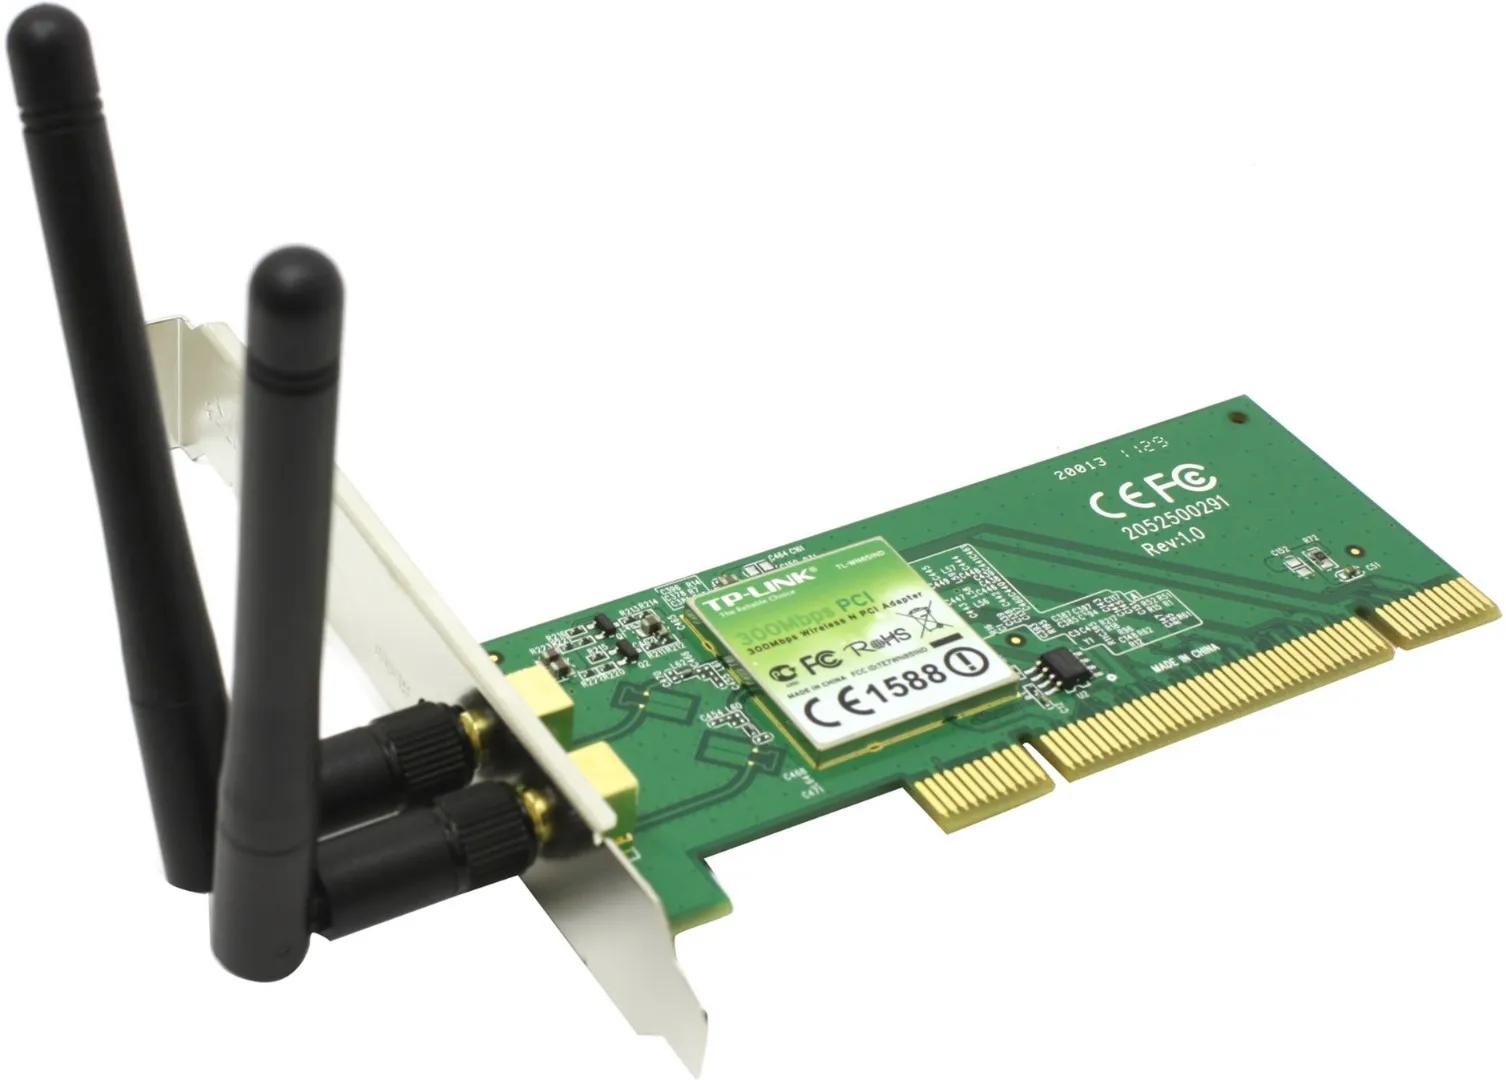 WiFi адаптер TL-WN851ND Wireless N PCI Adapter, Atheros, 2T2R, 2.4GHz, 802.11n/g/b, with 2 detachable antennas#1